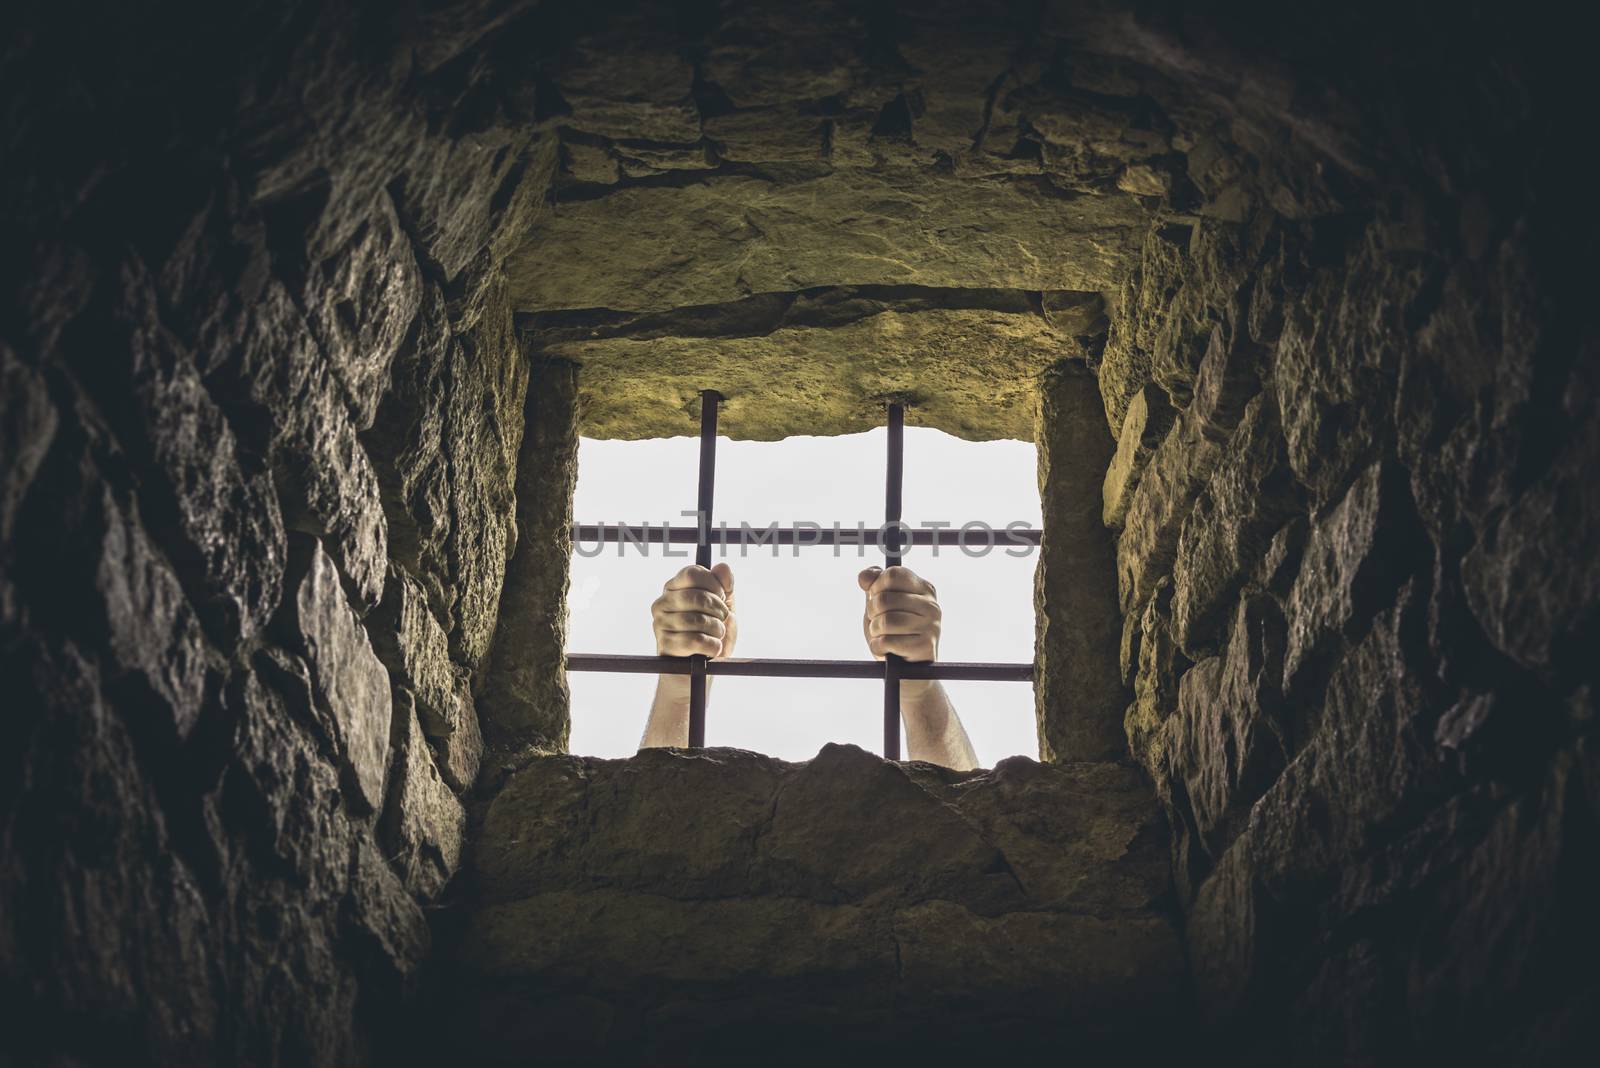 Conceptual image with a man's hand grabbing the metal bars from an old medieval prison